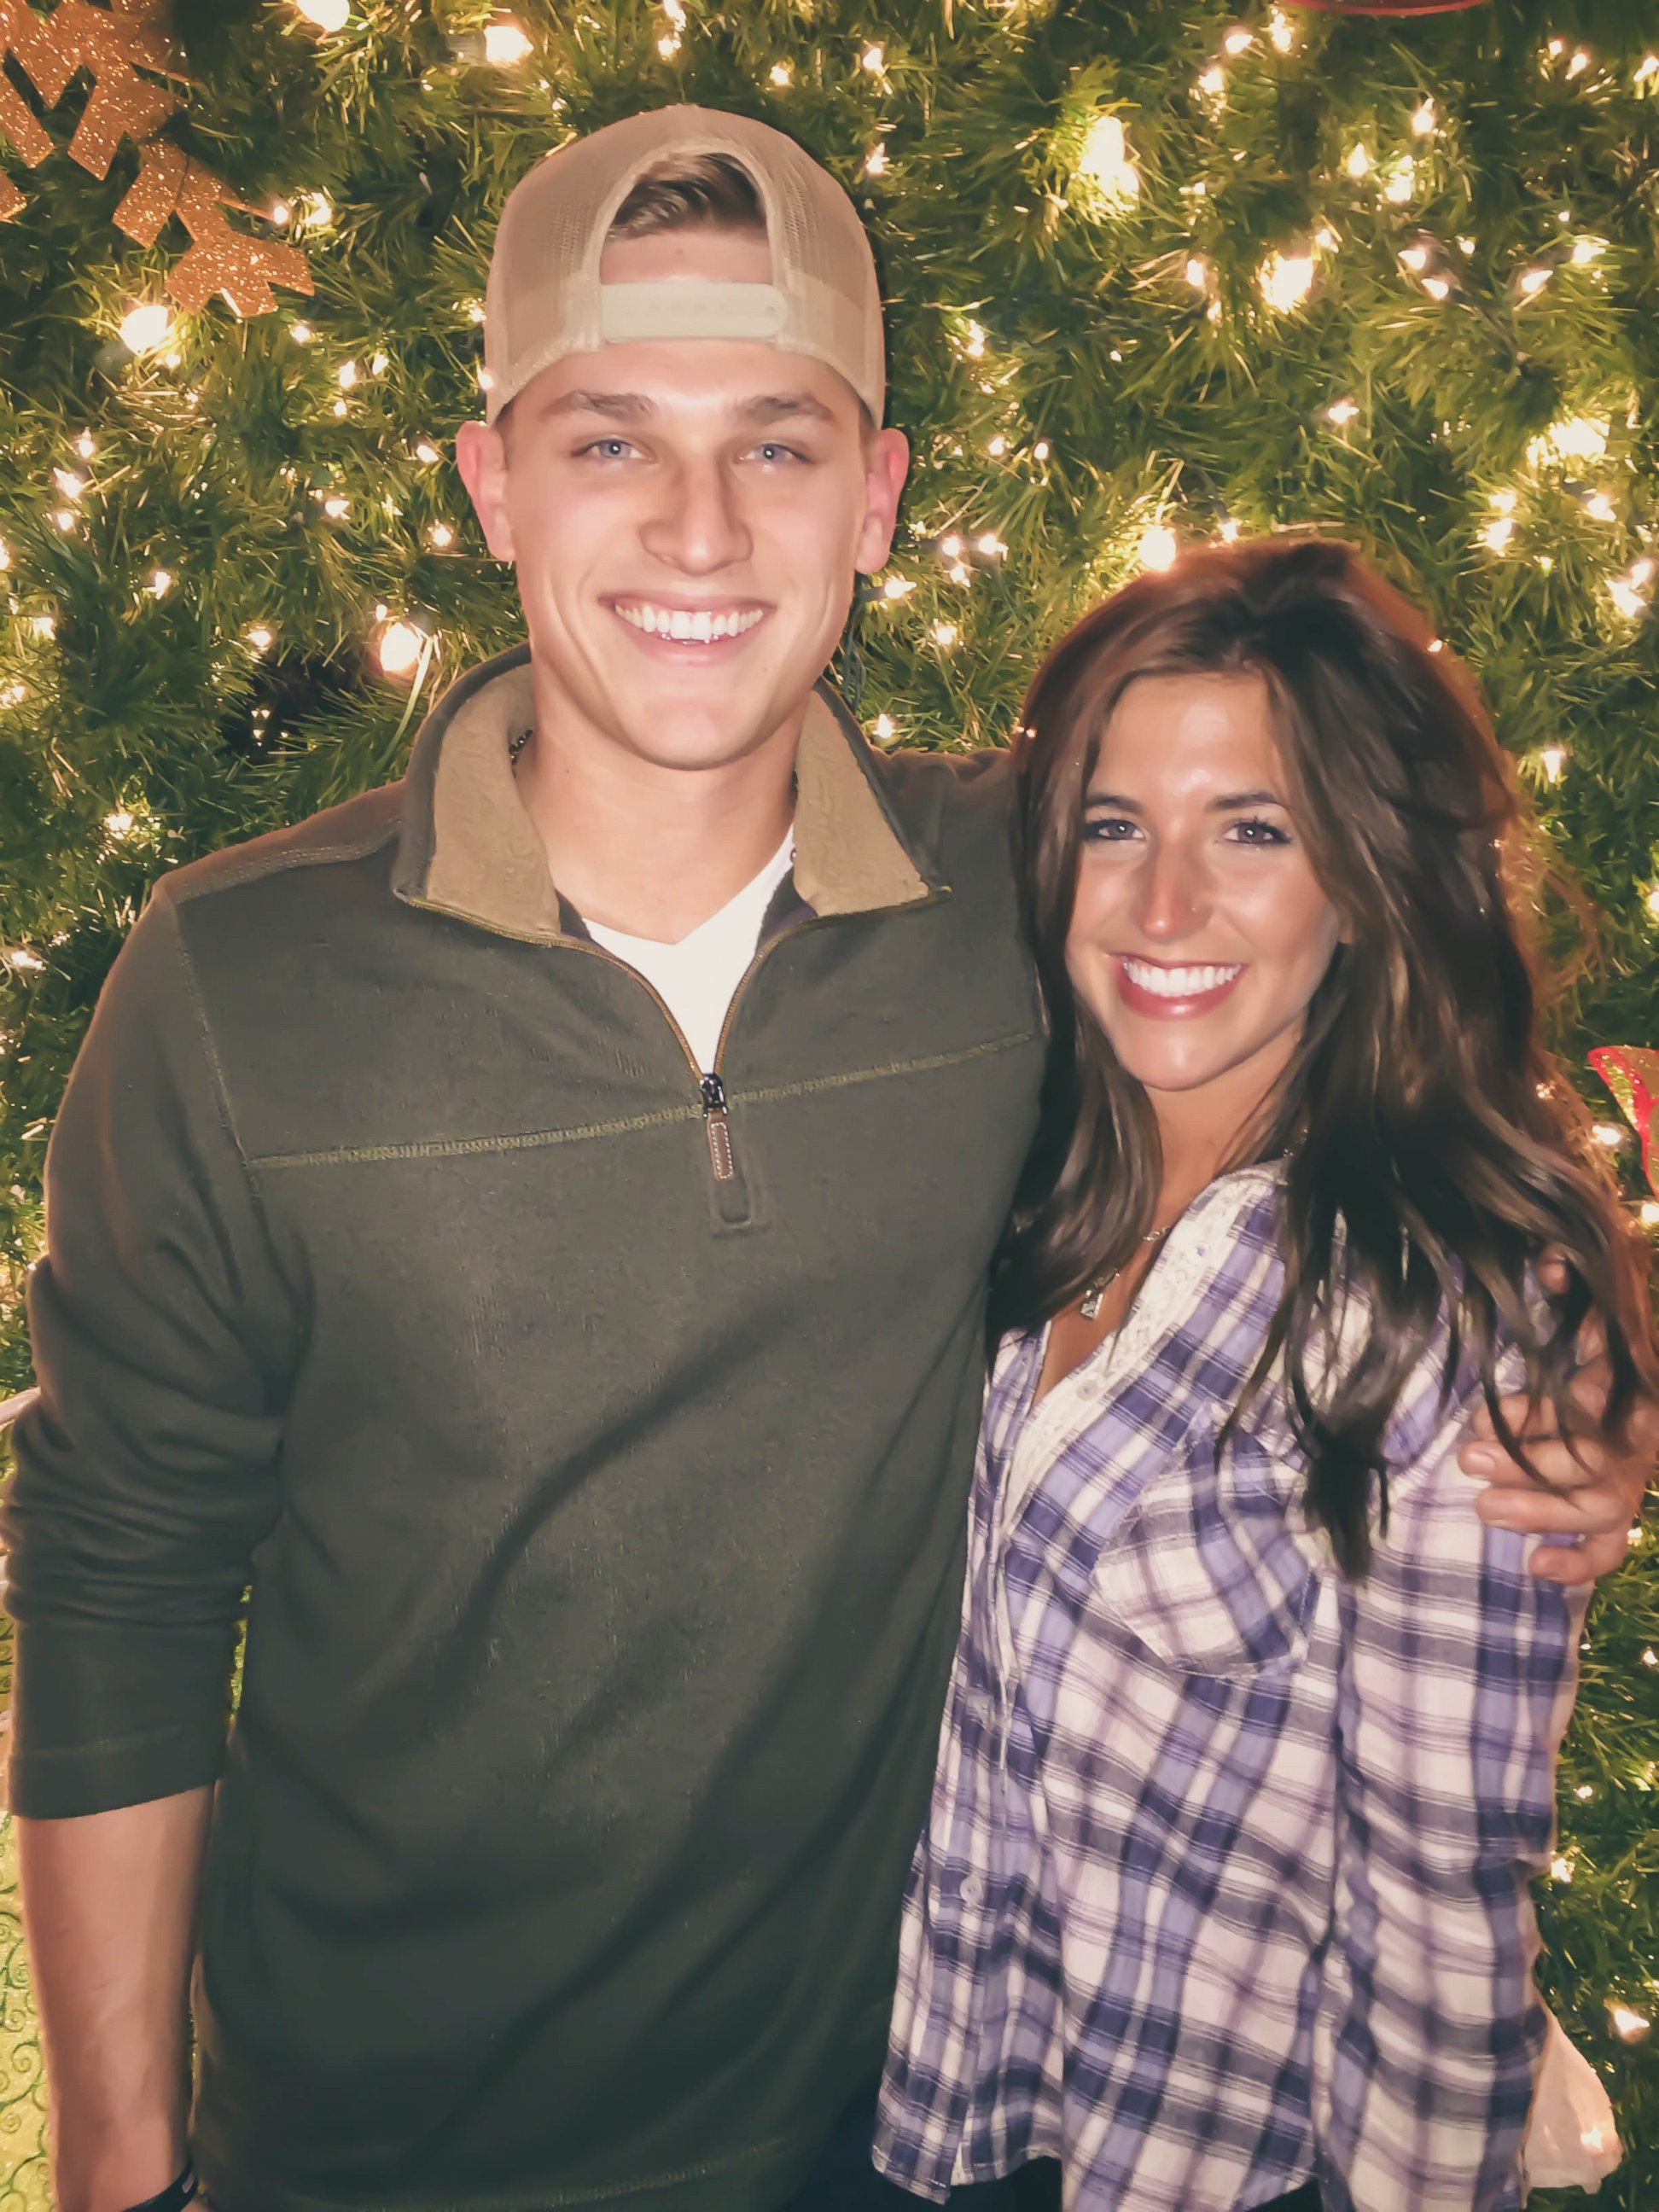 PHOTO: This undated photo shows Arika Stovall, 21, and her boyfriend Hunter Hanks, 21, who were both injured in a New Year's Day car crash.